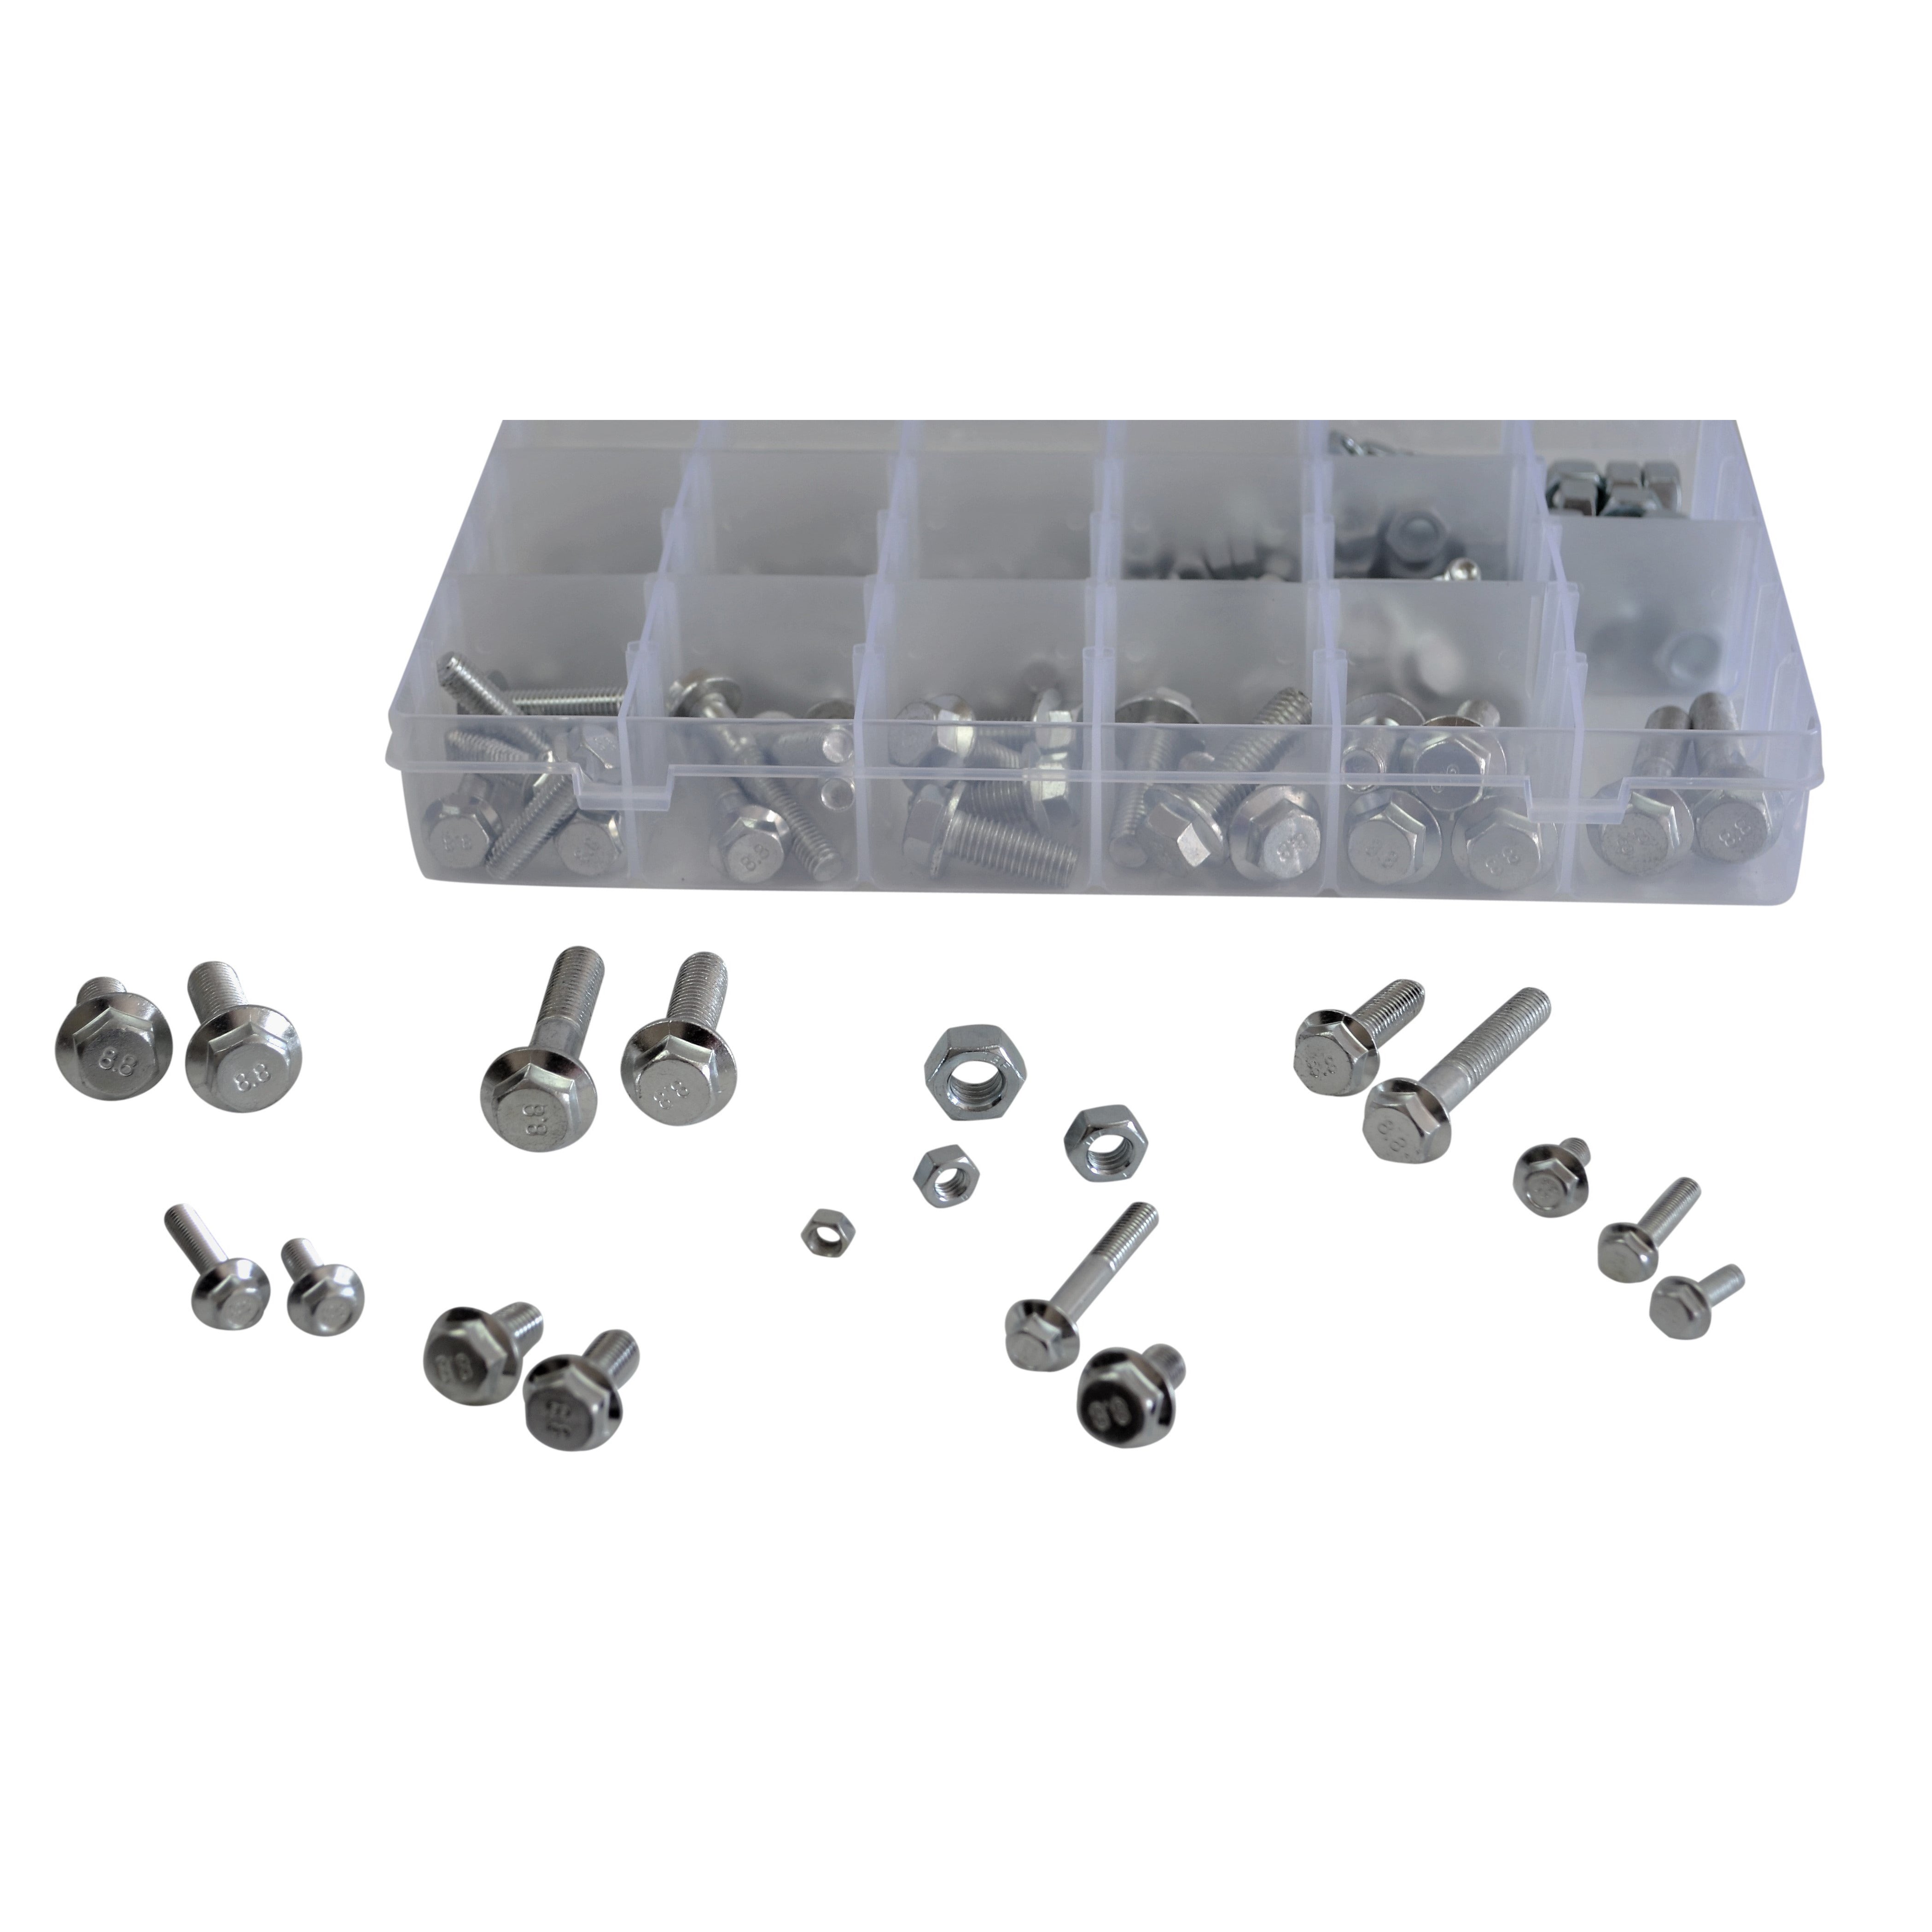 202 pc High Tensile 8.8 Flange Head Bolt and Nut Grab Kit Assortment  M5 - M10